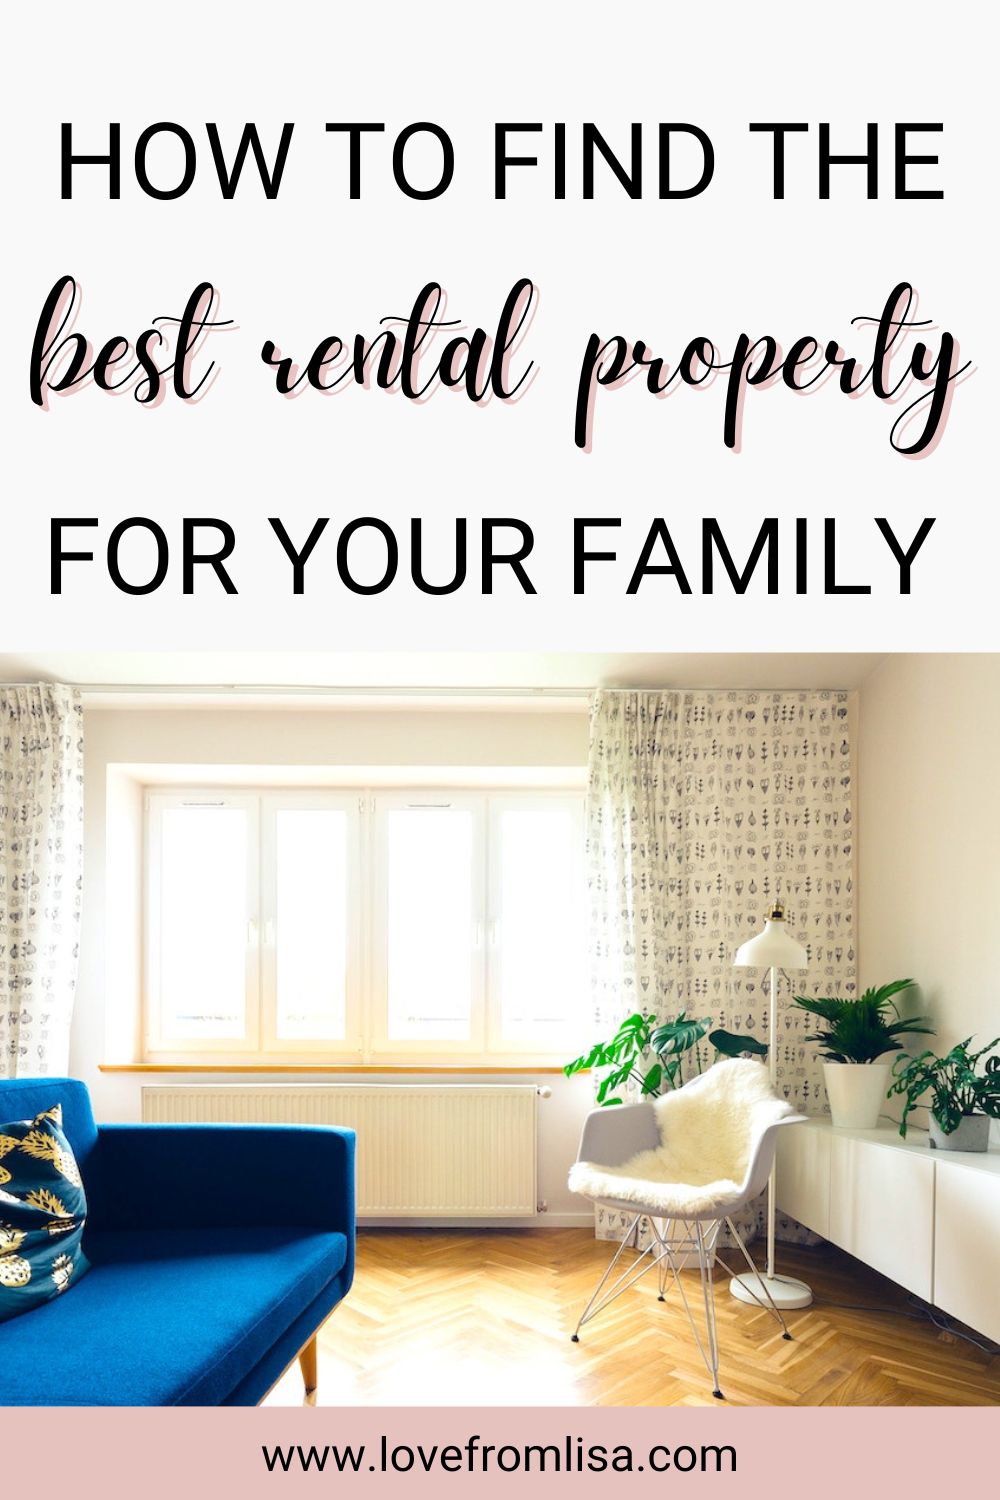 Find the best rental property for your family living Pinterest graphic